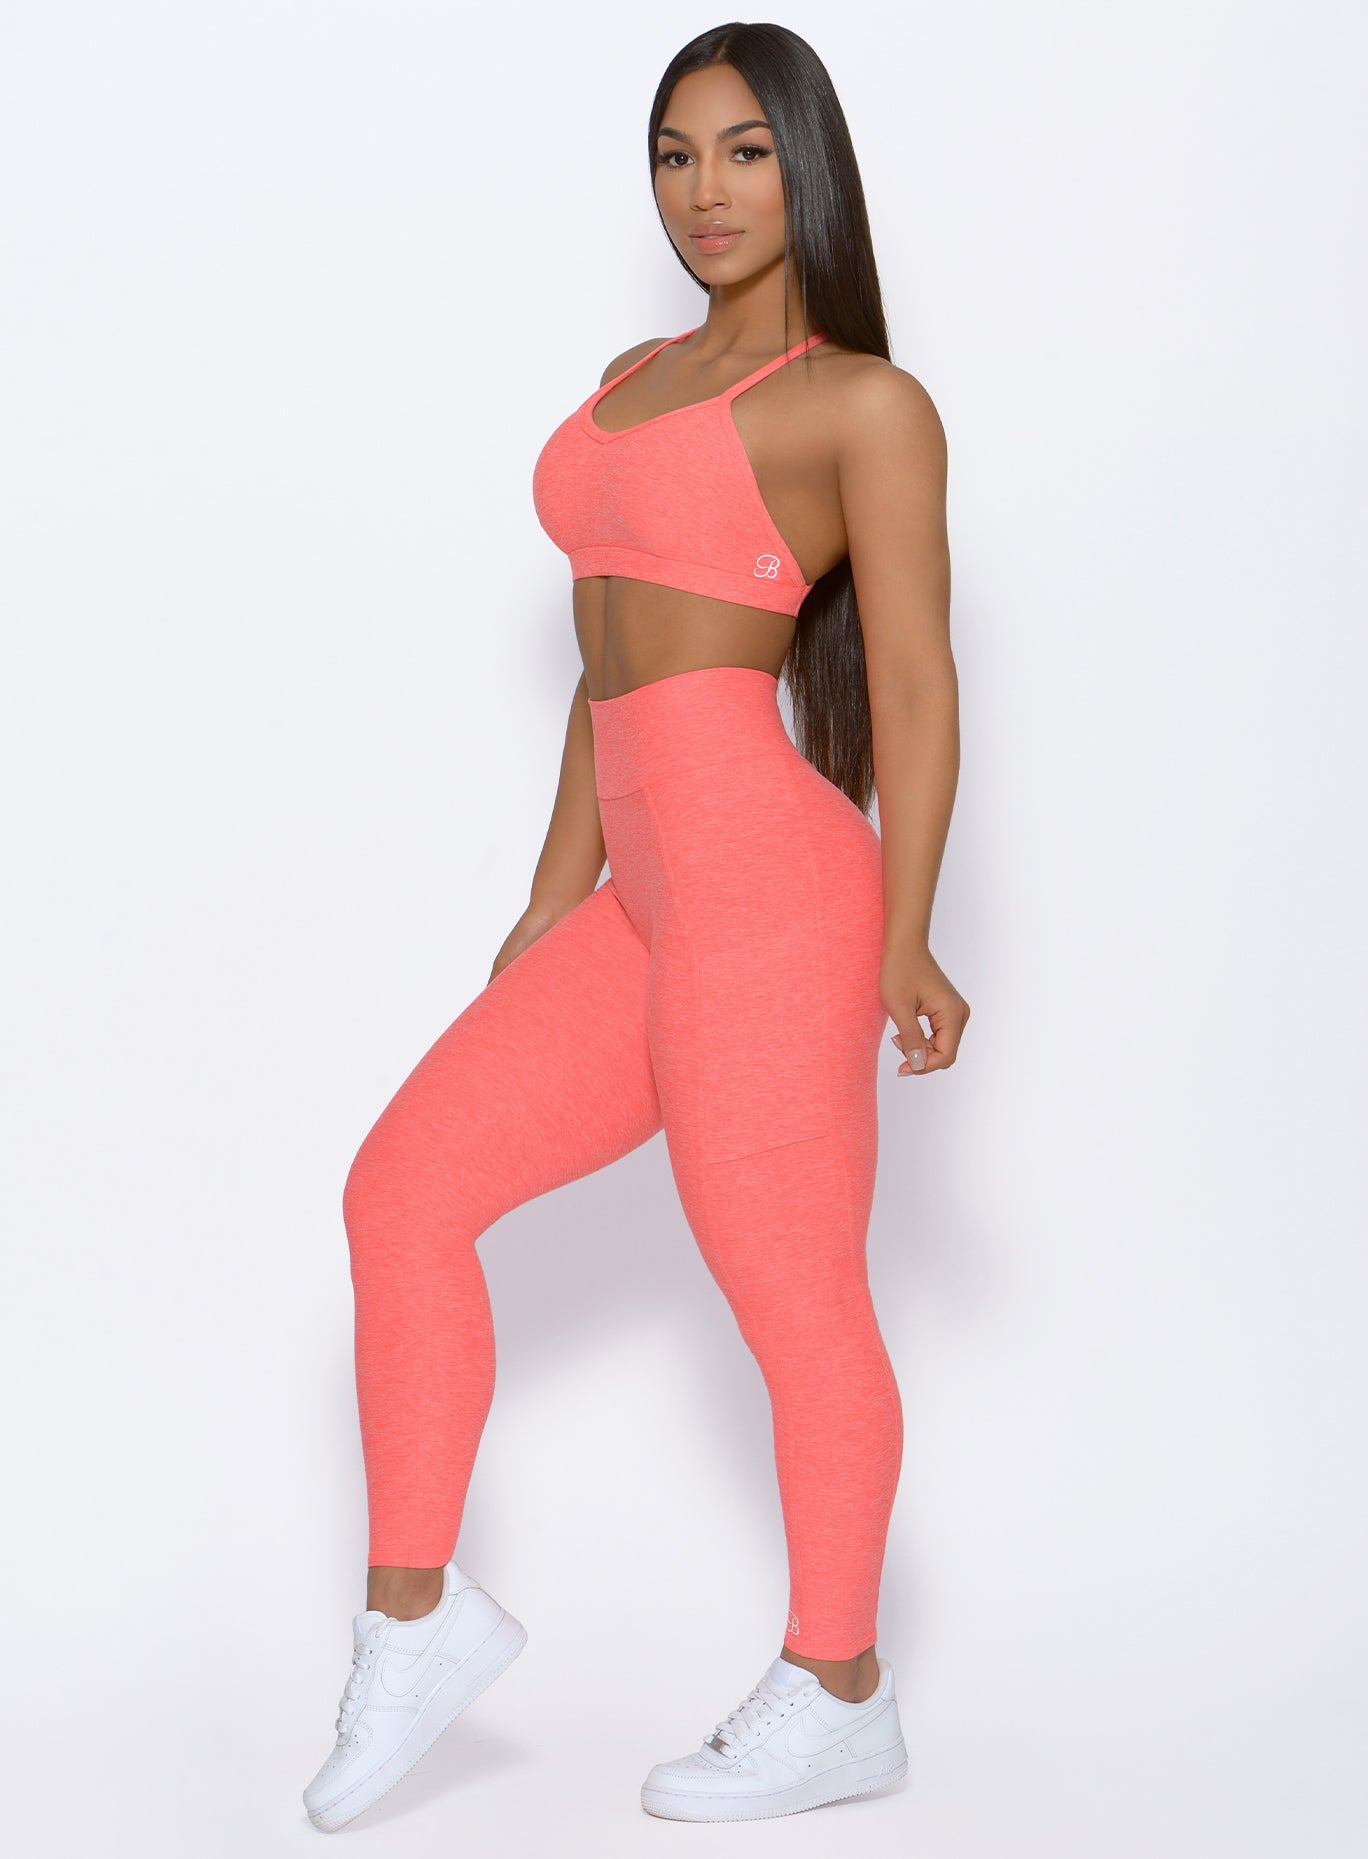 left side profile view of a model wearing our Curve leggings and the Braid Back Sports Bra in Coral color